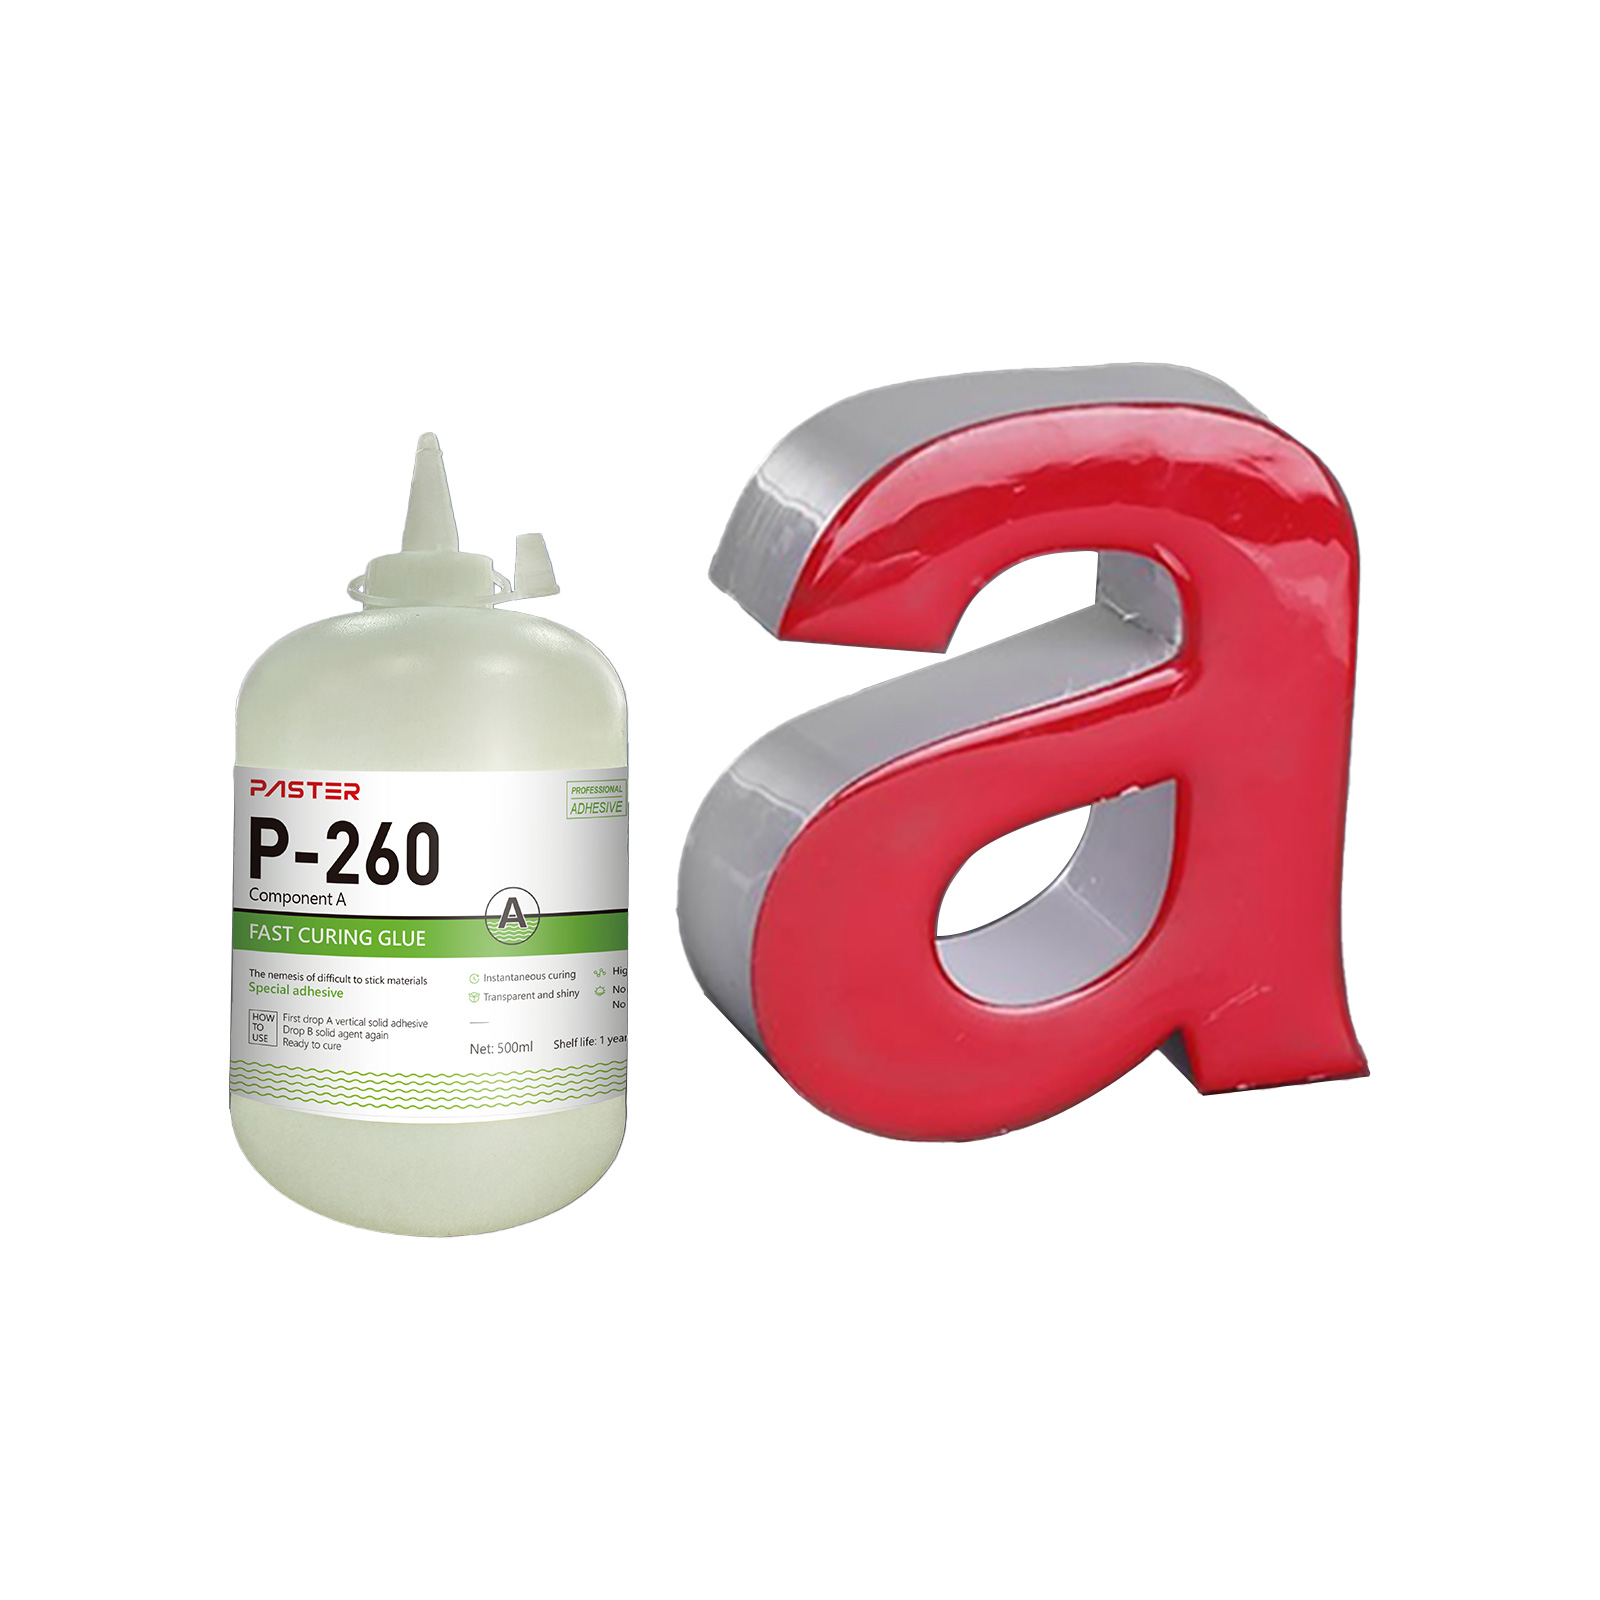 P-260A FAST CURING GLUE for Channel Letter